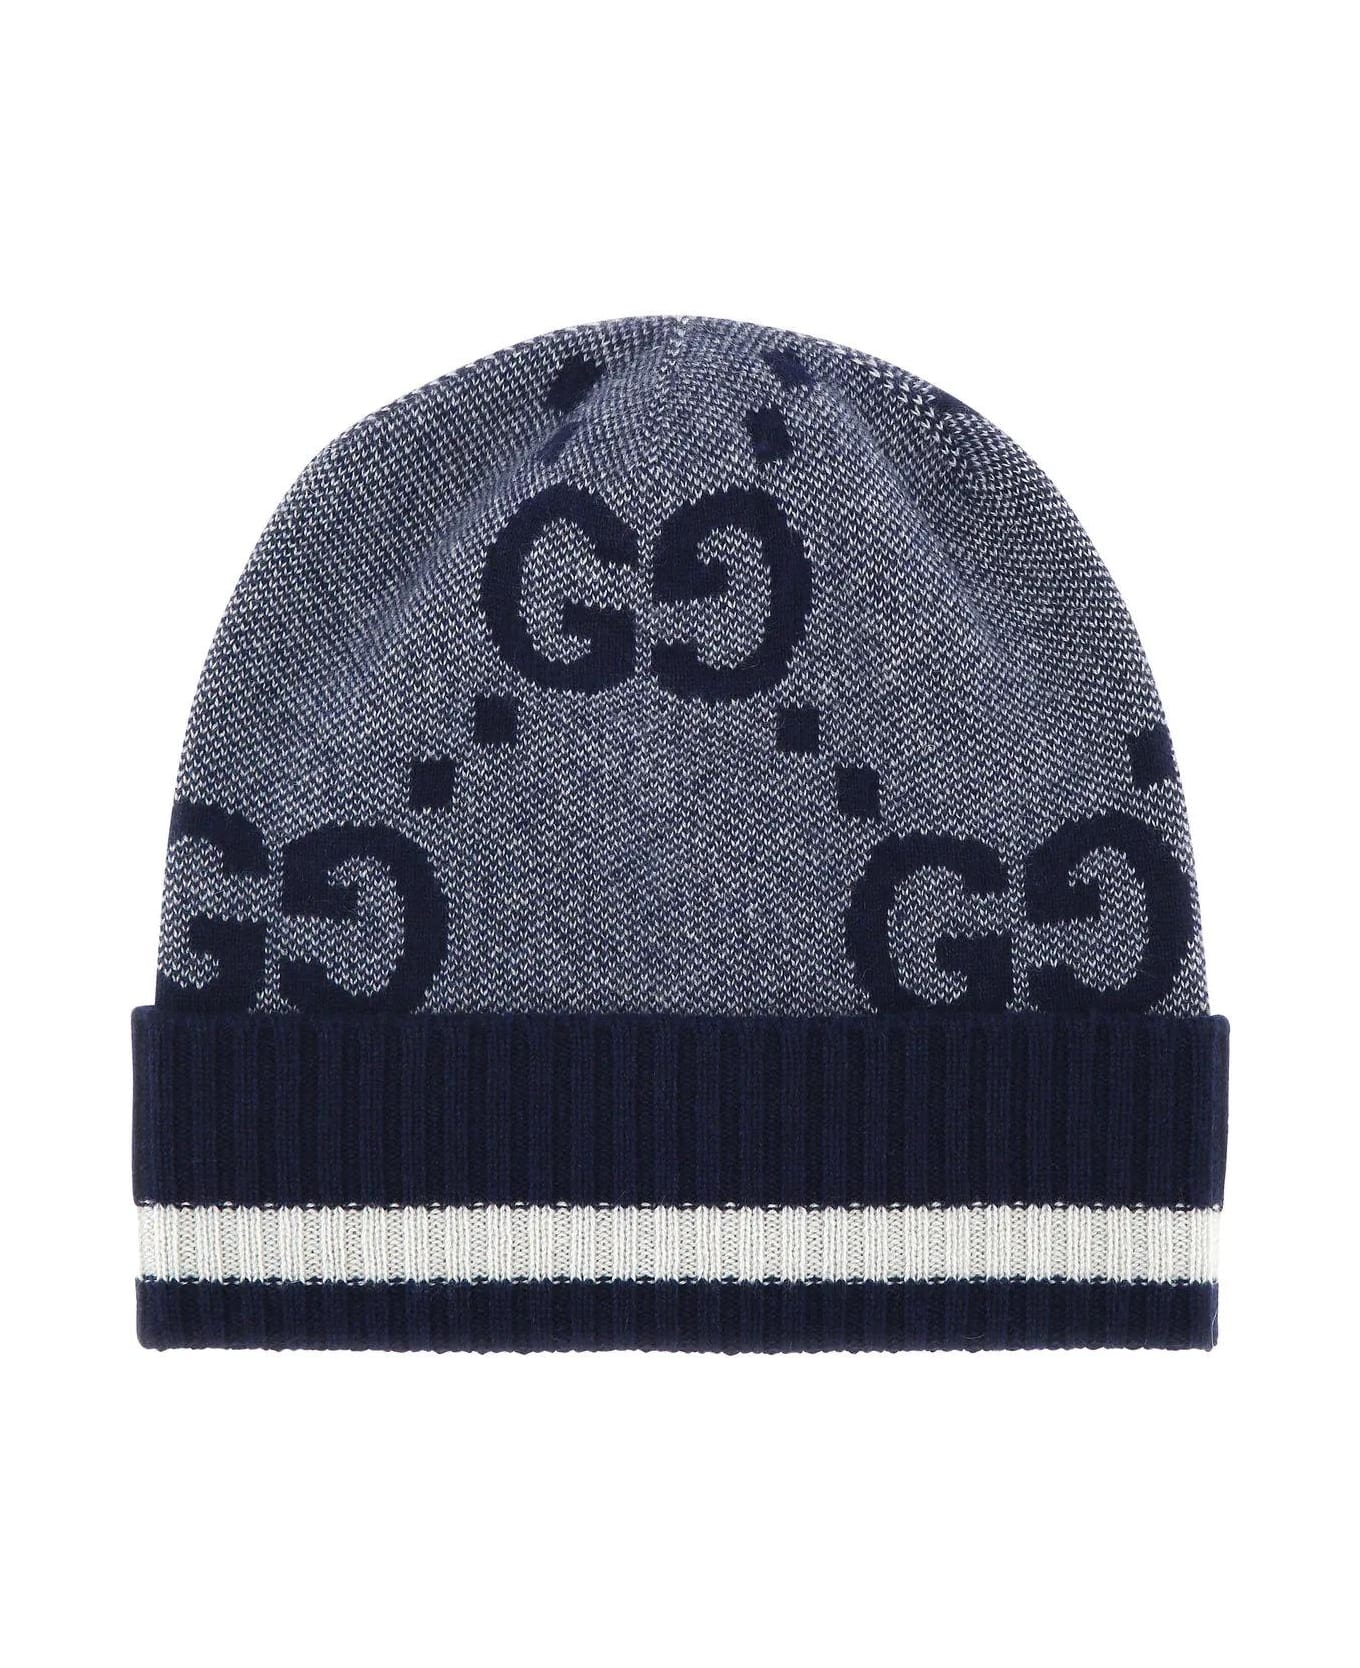 Gucci Embroidered Cashmere Beanie Hat 帽子